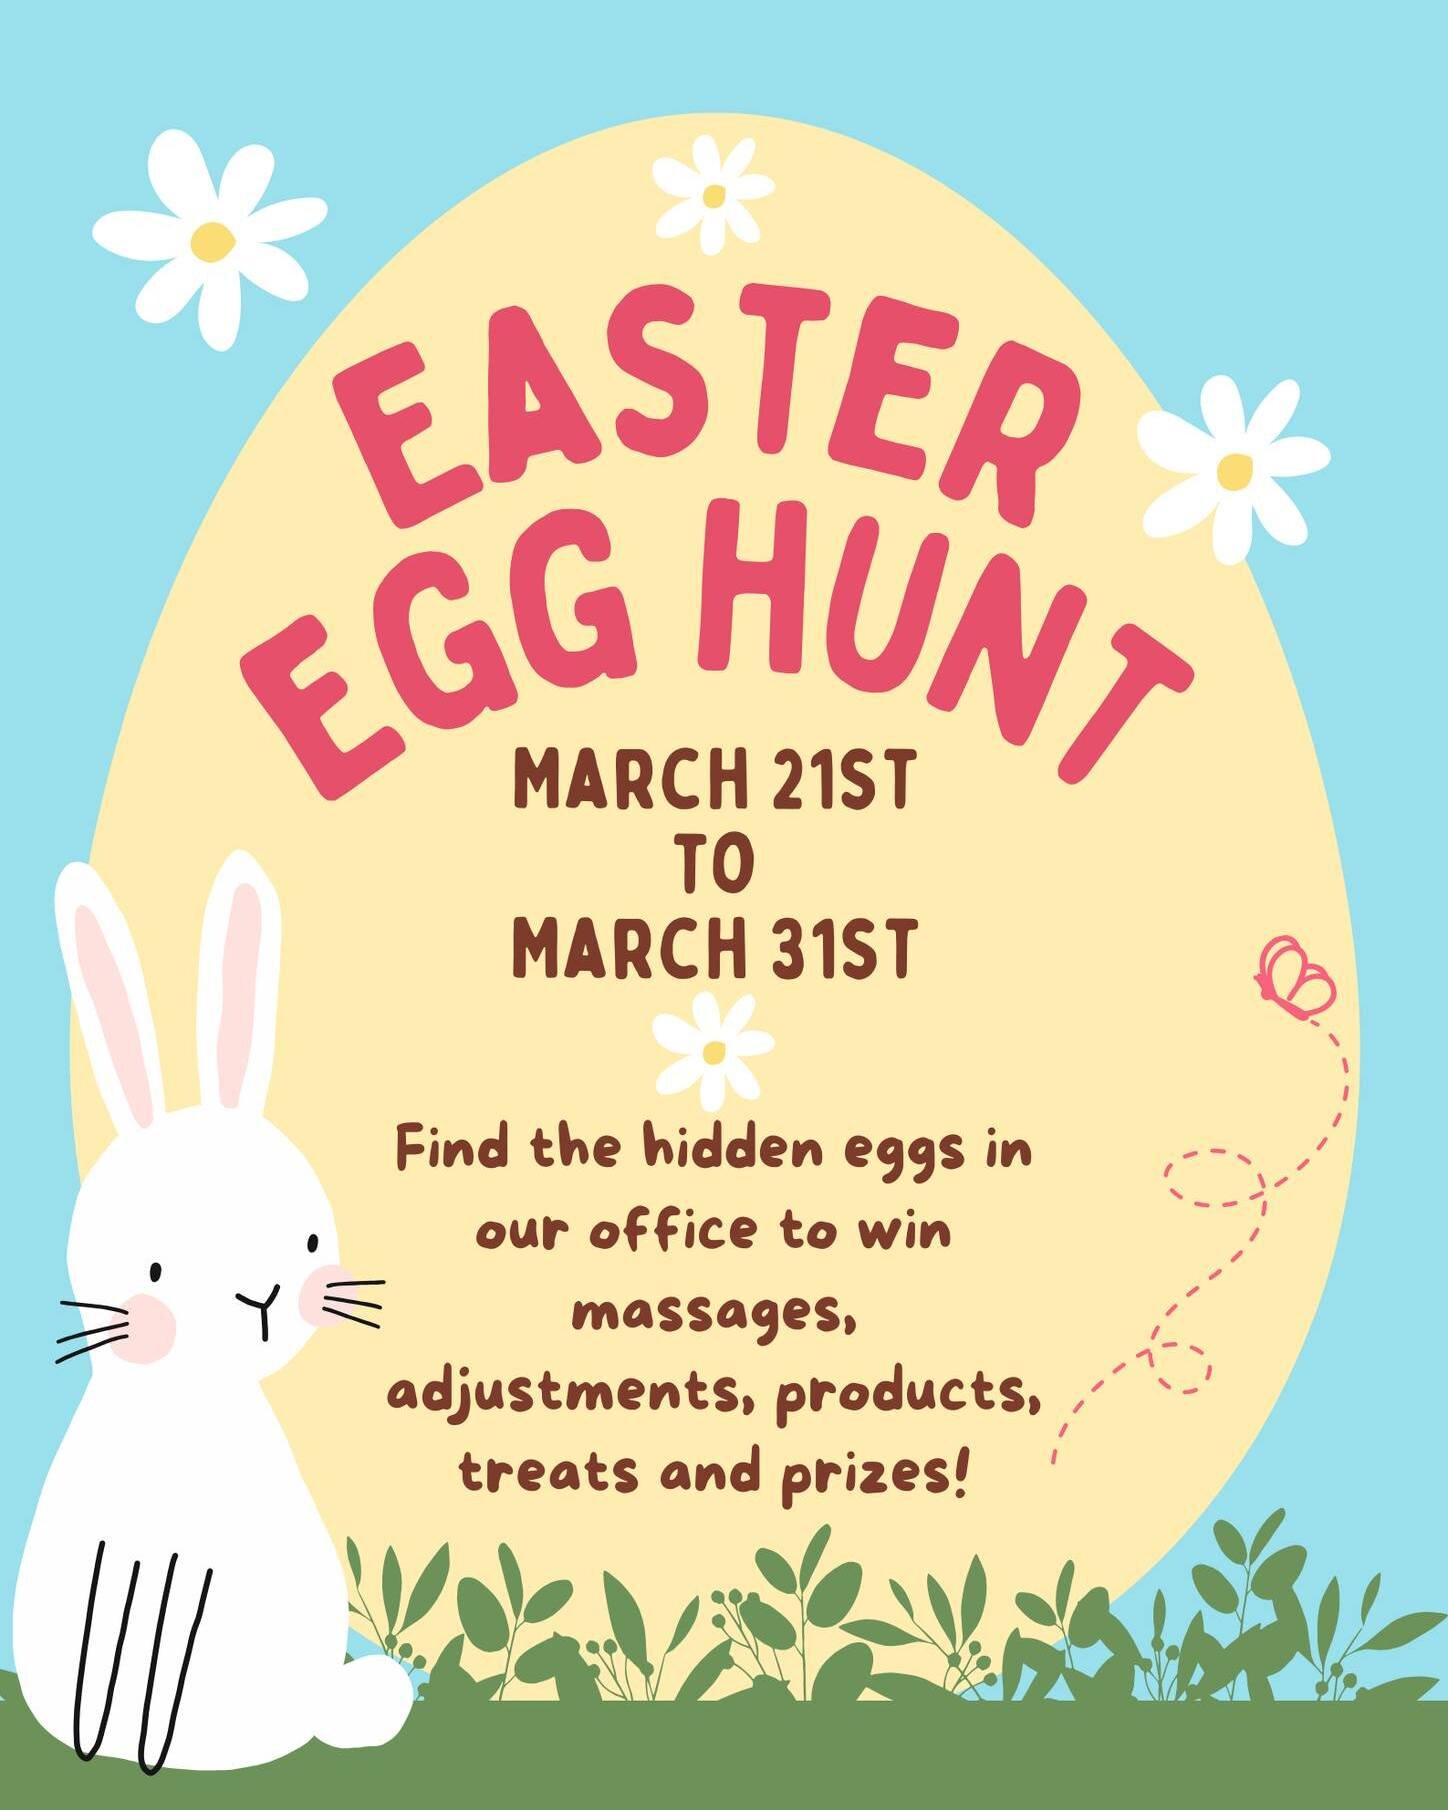 🐰🌷 Hop into our office Easter Egg Hunt! 🥚✨ From March 21st to March 31st, join the fun as you search high and low for hidden treasures! 🎁 Prizes await, including massages, facials, chiropractic adjustments, products, goodies, and gift cards! 🎉 P